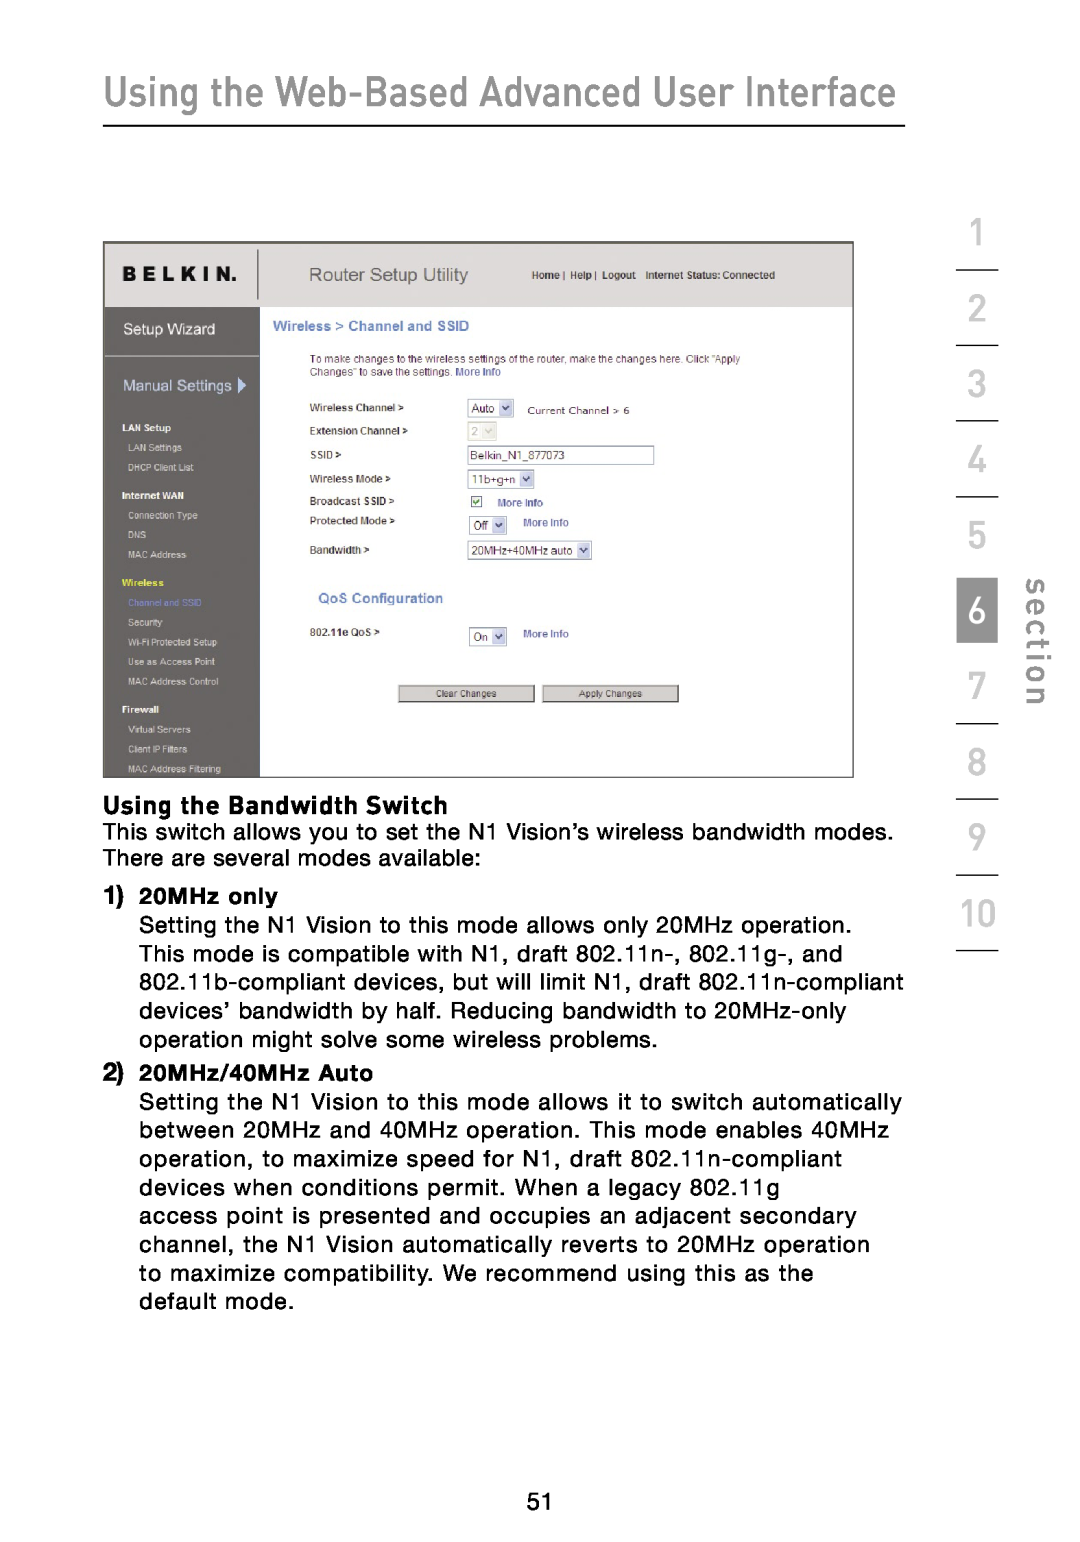 Belkin N1 user manual Using the Bandwidth Switch, Using the Web-Based Advanced User Interface, section, 1 20MHz only 